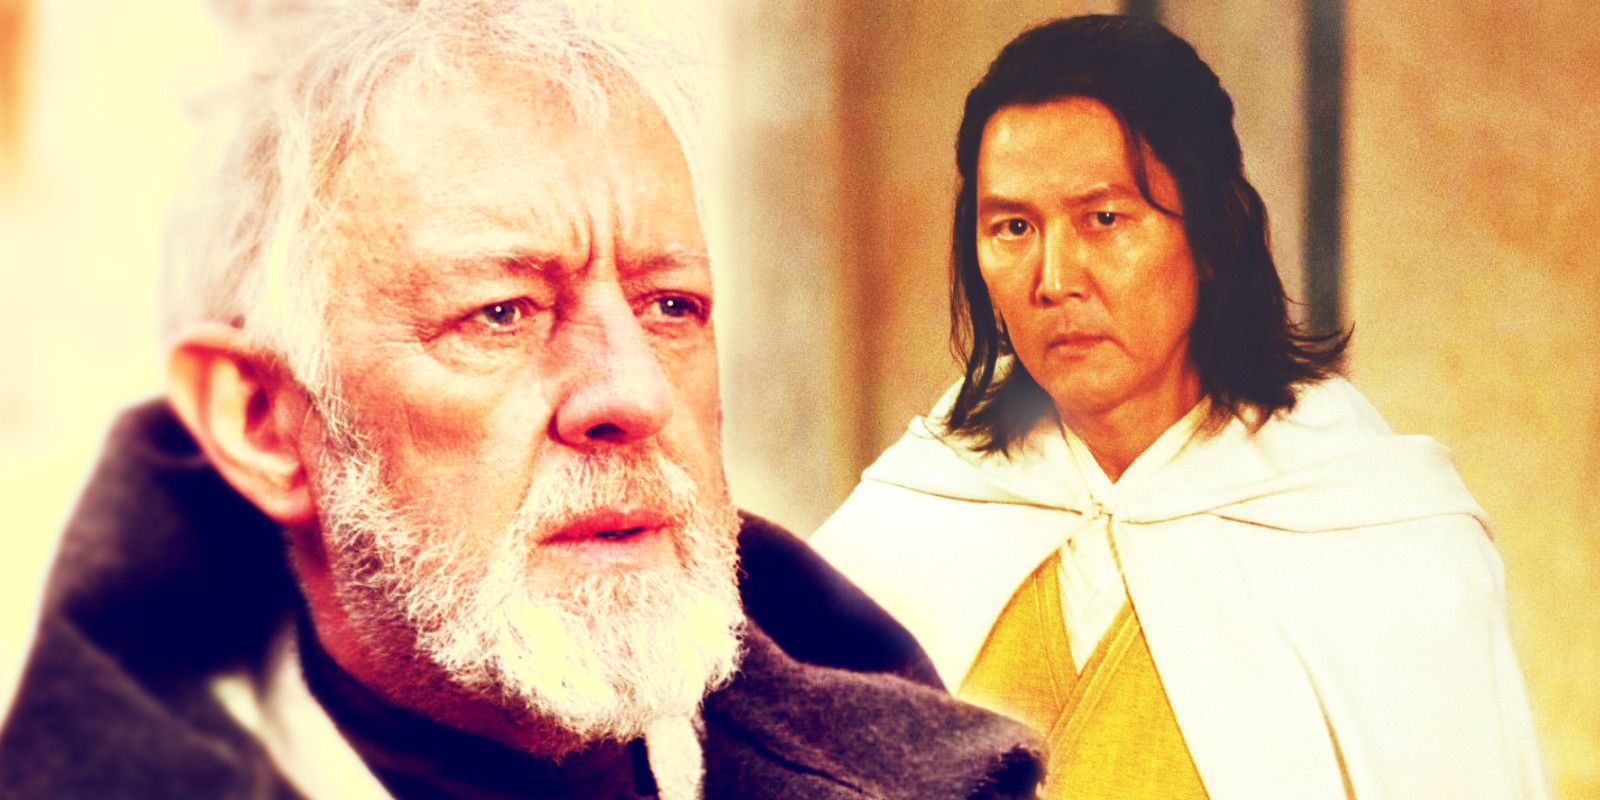 Obi Wan Kenobi in A New Hope and Jedi Master Sol in The Acolyte